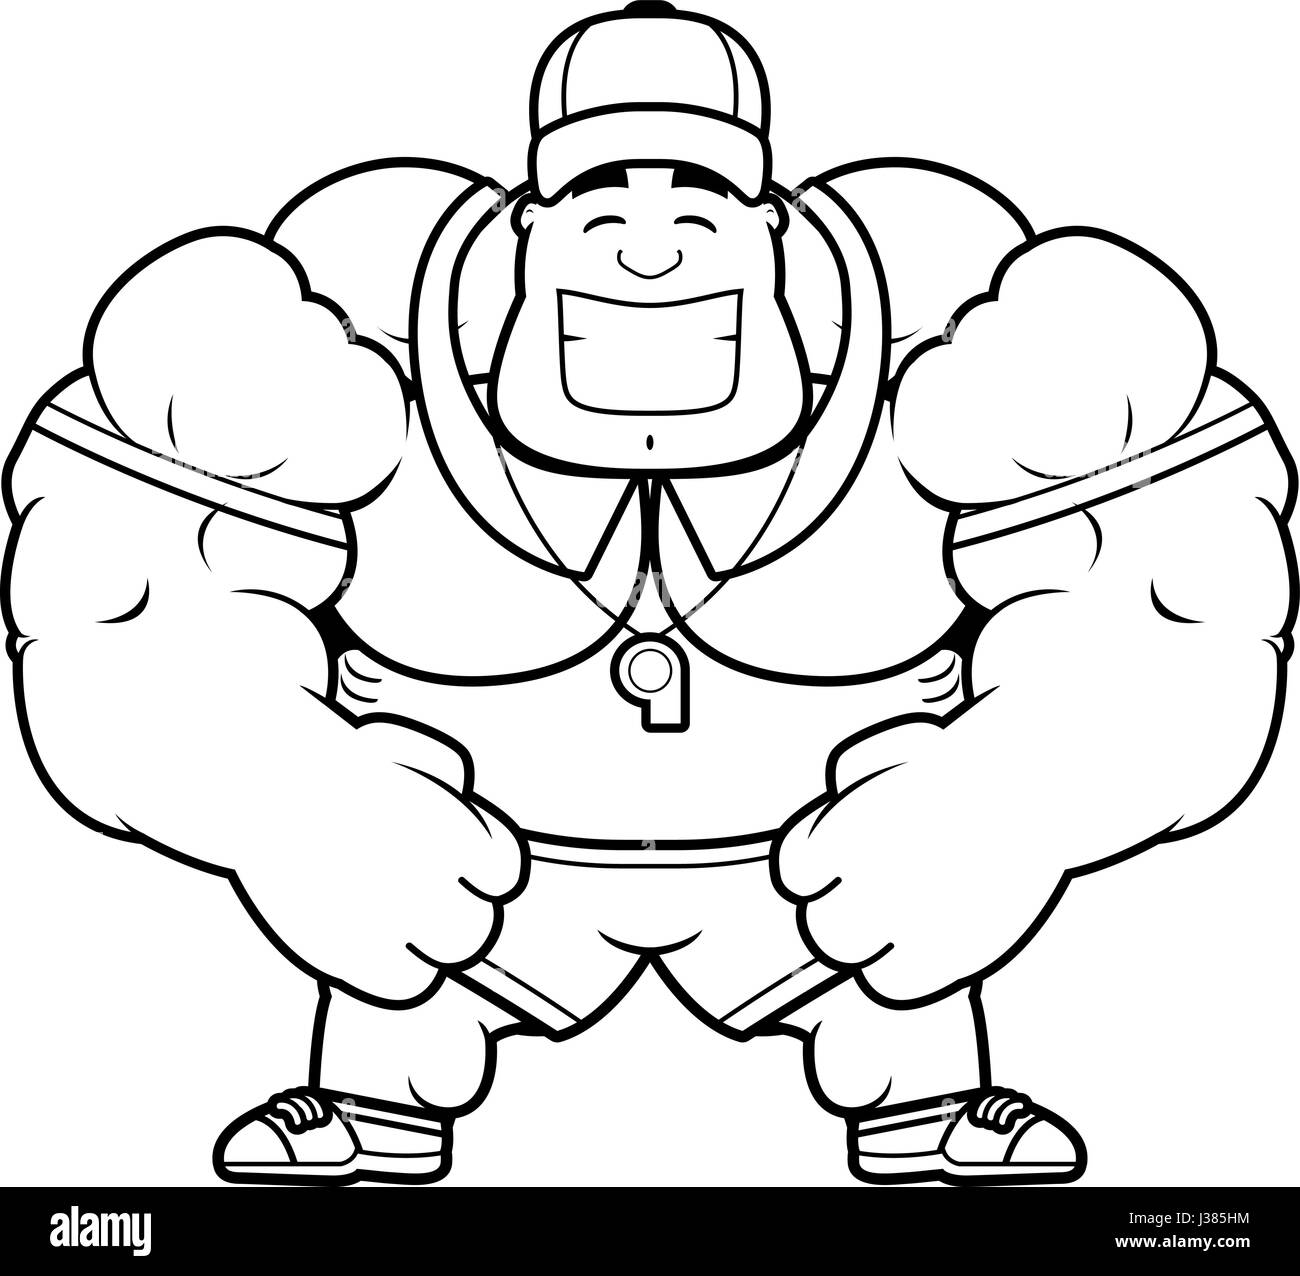 A cartoon illustration of a muscular coach smiling. Stock Vector